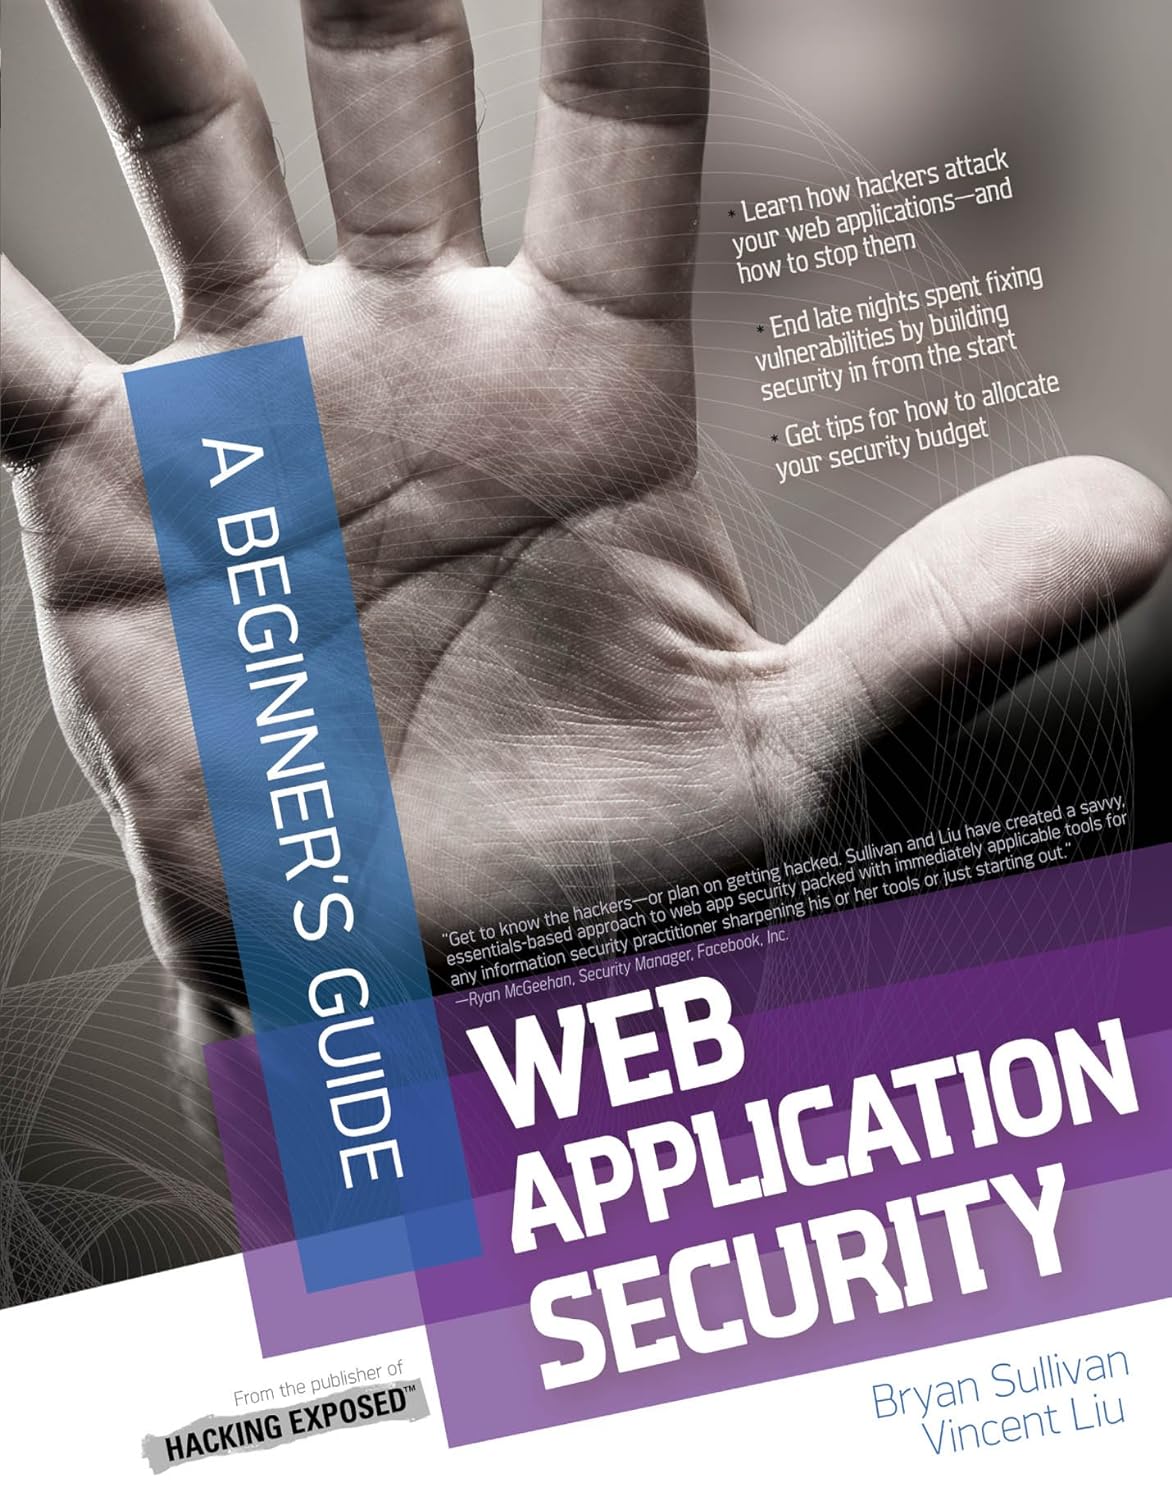 Cover of Web Application Security: A Beginners Guide by Bryan Sullivan and Vincent Liu